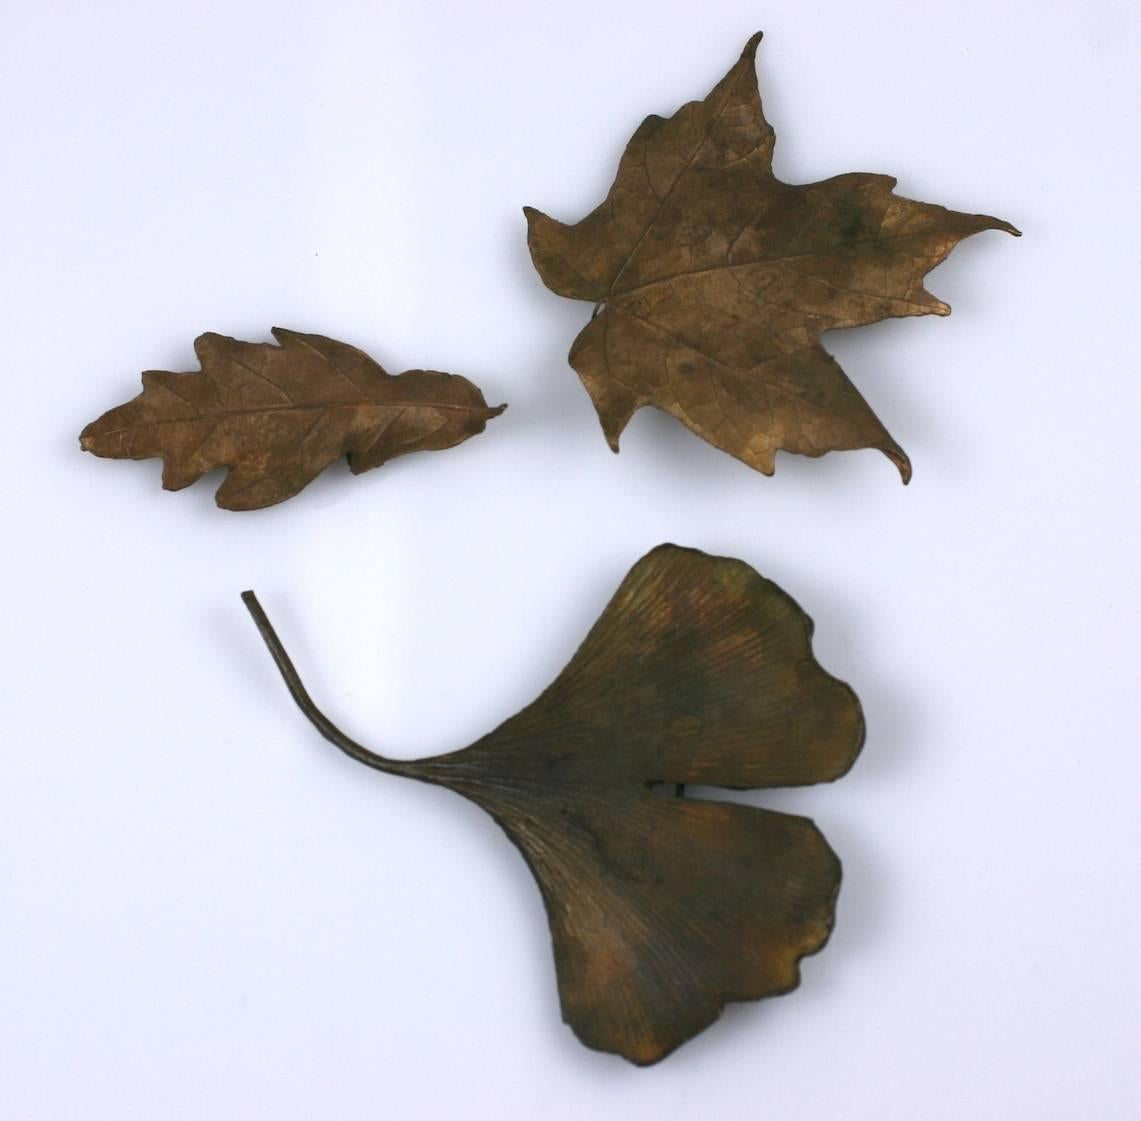 Bronze Lost Wax Leaf Brooches in different forms such as gingko and  maple leaves. 3 brooches are hand cast from actual leaves and delicately patinaed to resemble the real thing in the style of John Iverson. 1960's USA.
Gingko 3